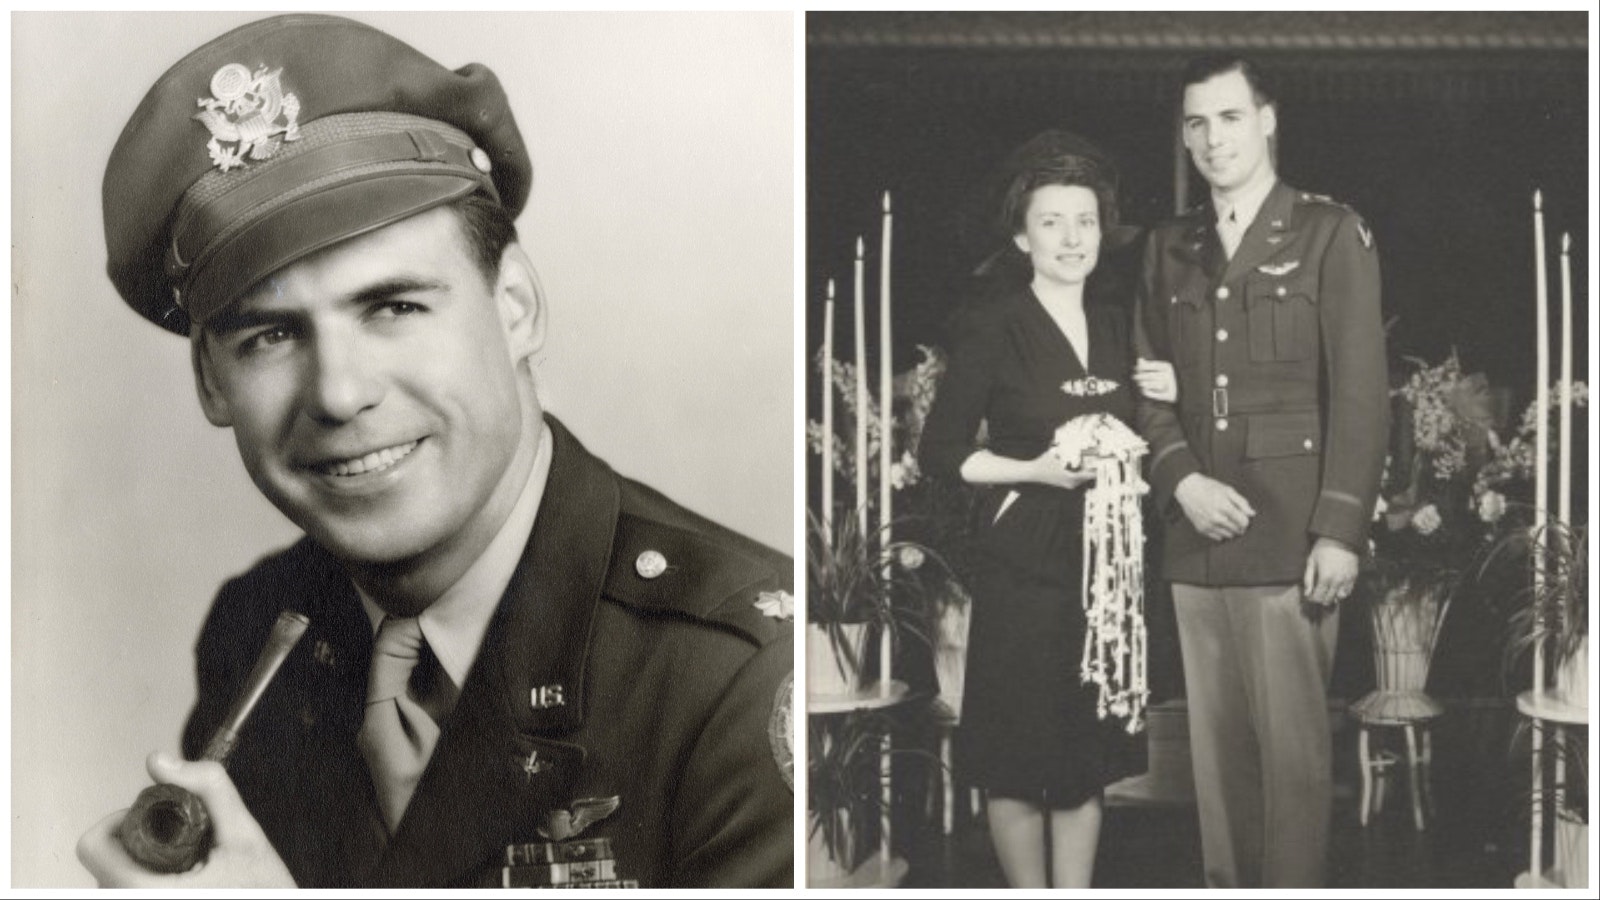 World War II pilot E. A. “Bill” Sikes flew bombers in both the European and Pacific theaters of war. At right is a wedding photo taken in Casper of Sikes and his wife, the former Hazel Wheaton.